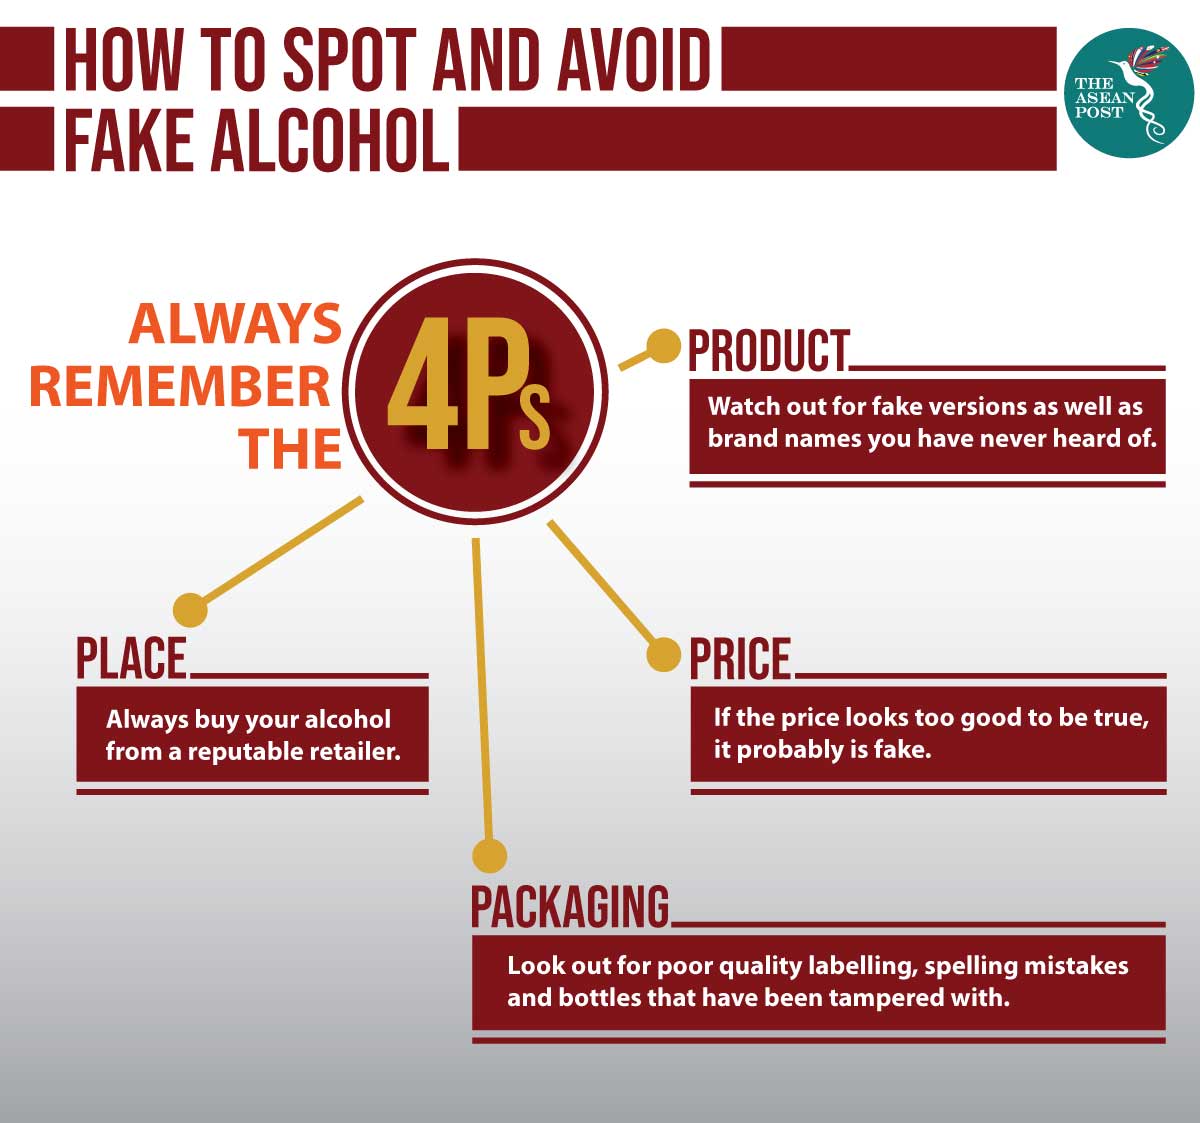 How to spot fake alcohol